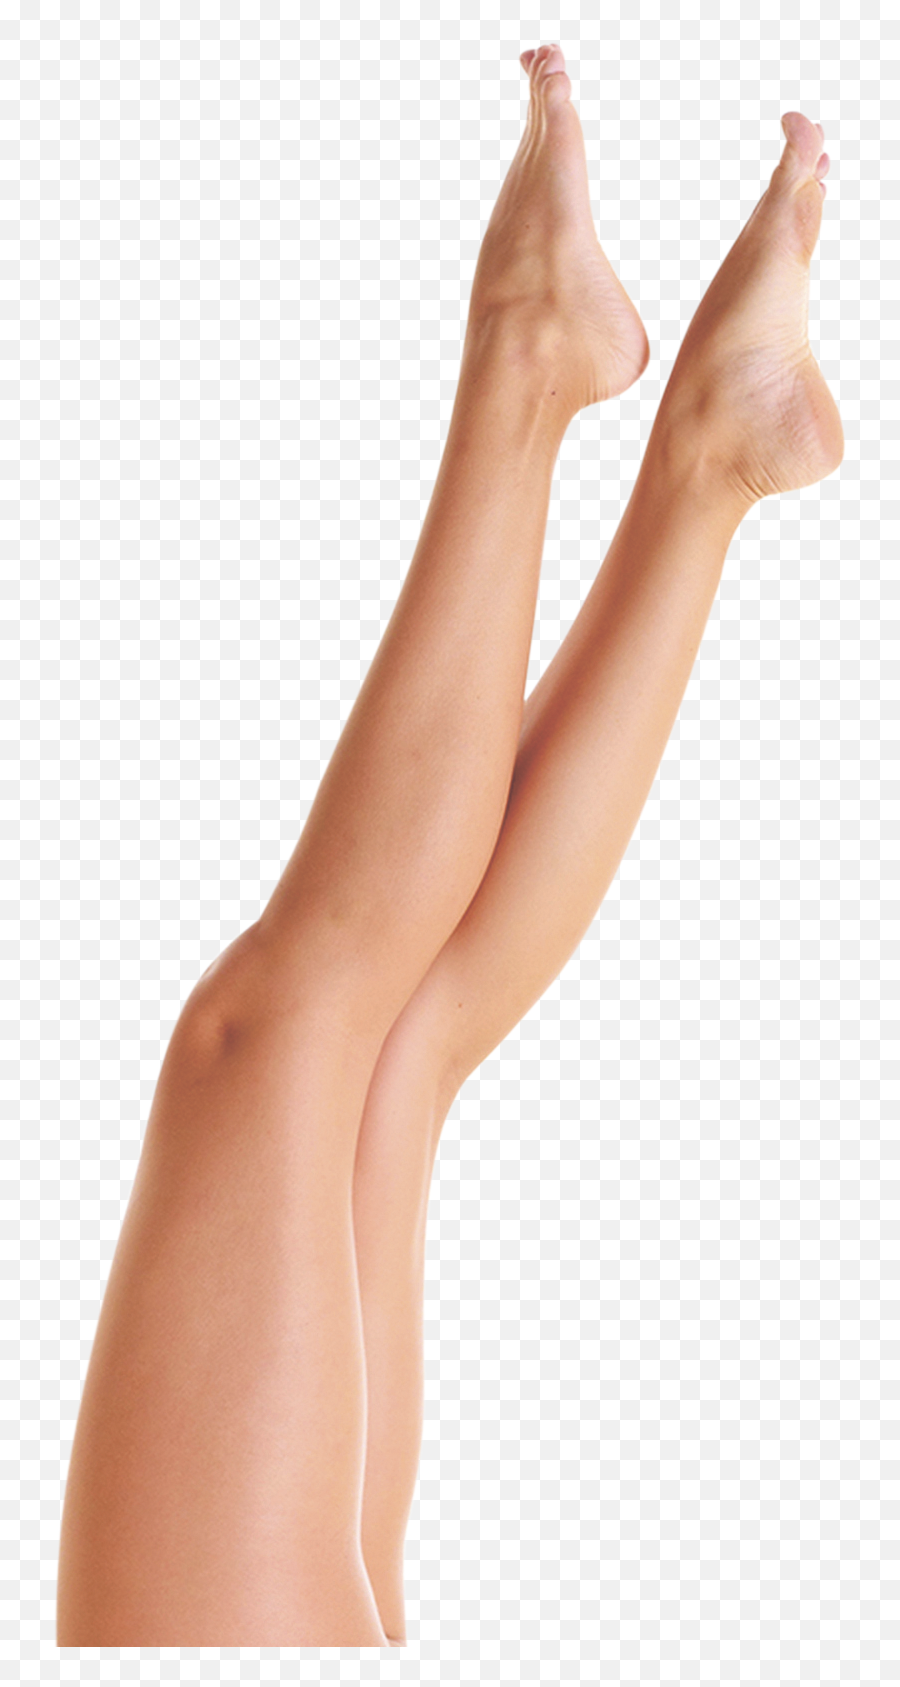 Women Legs Png Image With - Portable Network Graphics,Legs Png